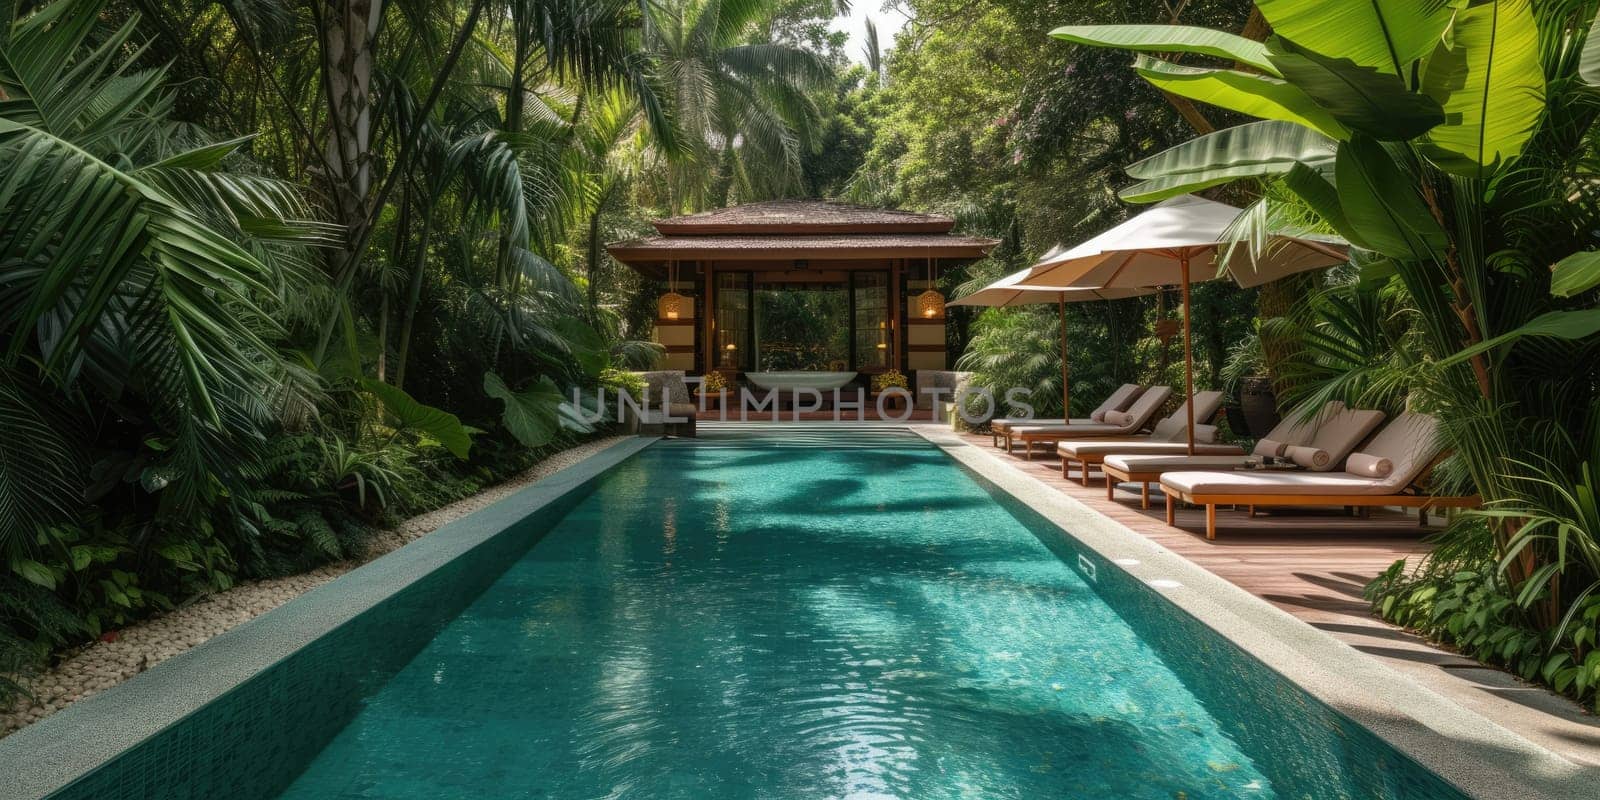 A luxurious spa retreat in a tropical setting, serene pool, lush greenery, embodying relaxation and wellness. Resplendent.